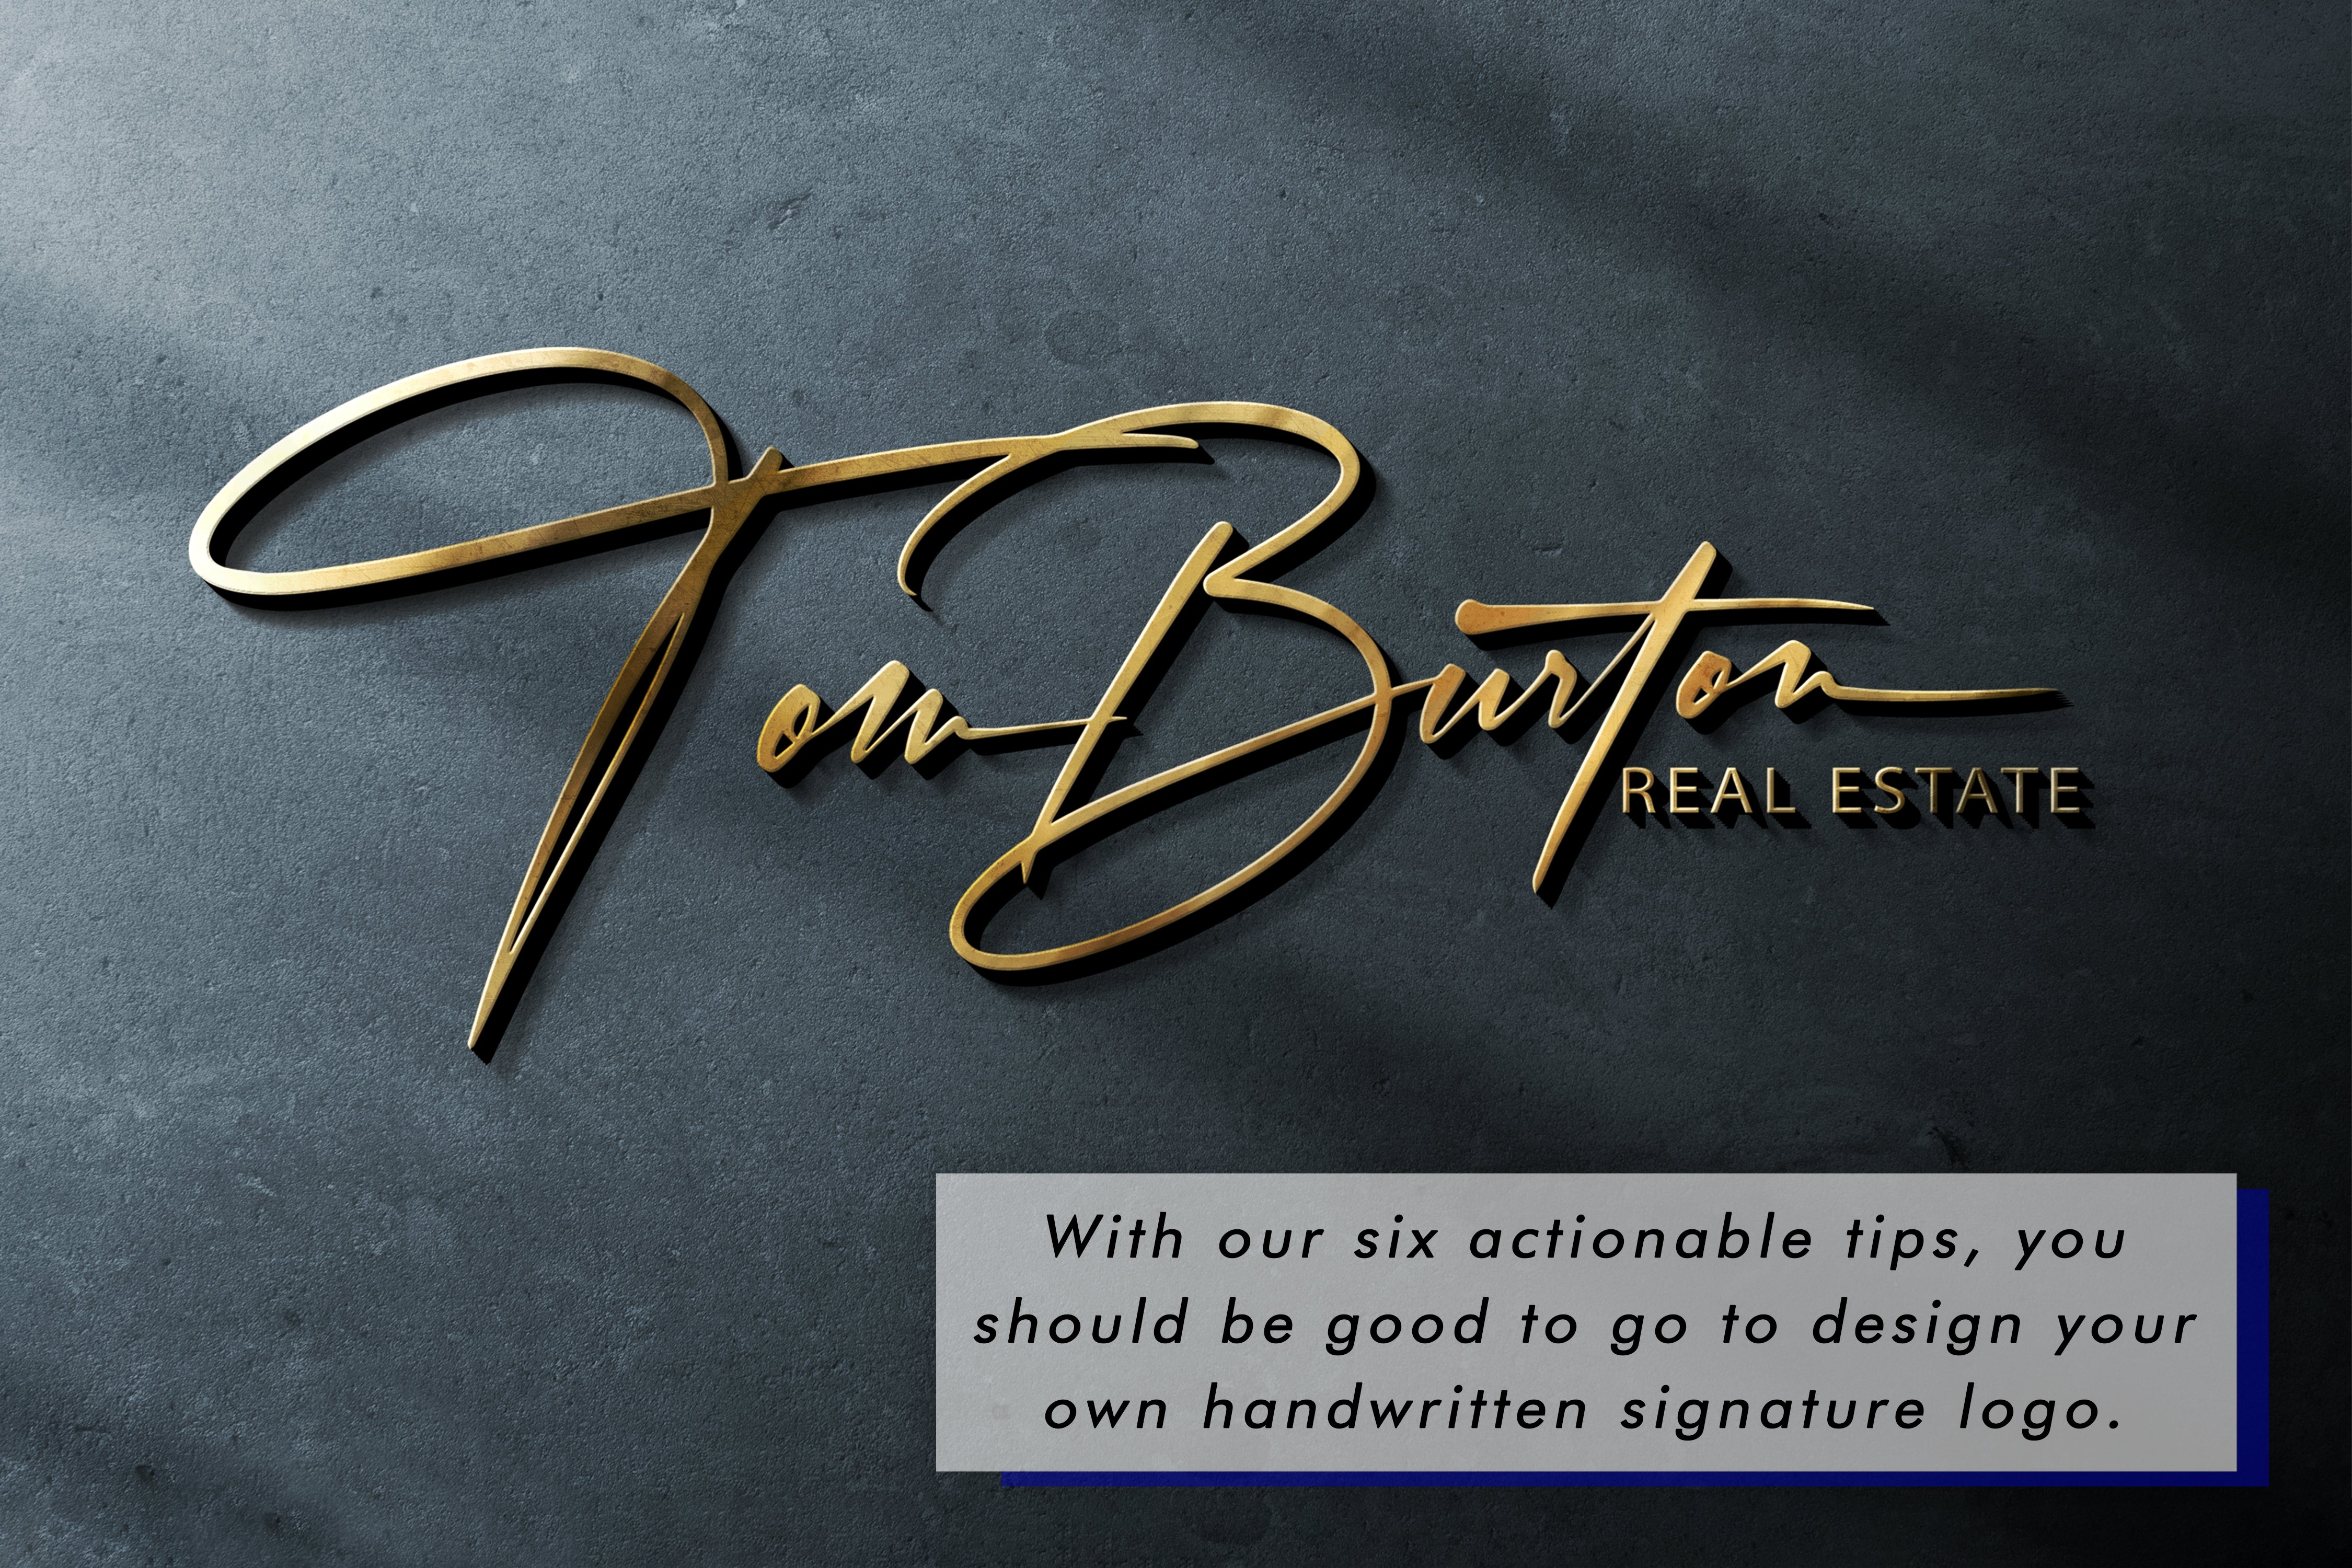 With our six actionable tips, you should be good to go to design your own handwritten signature logo.